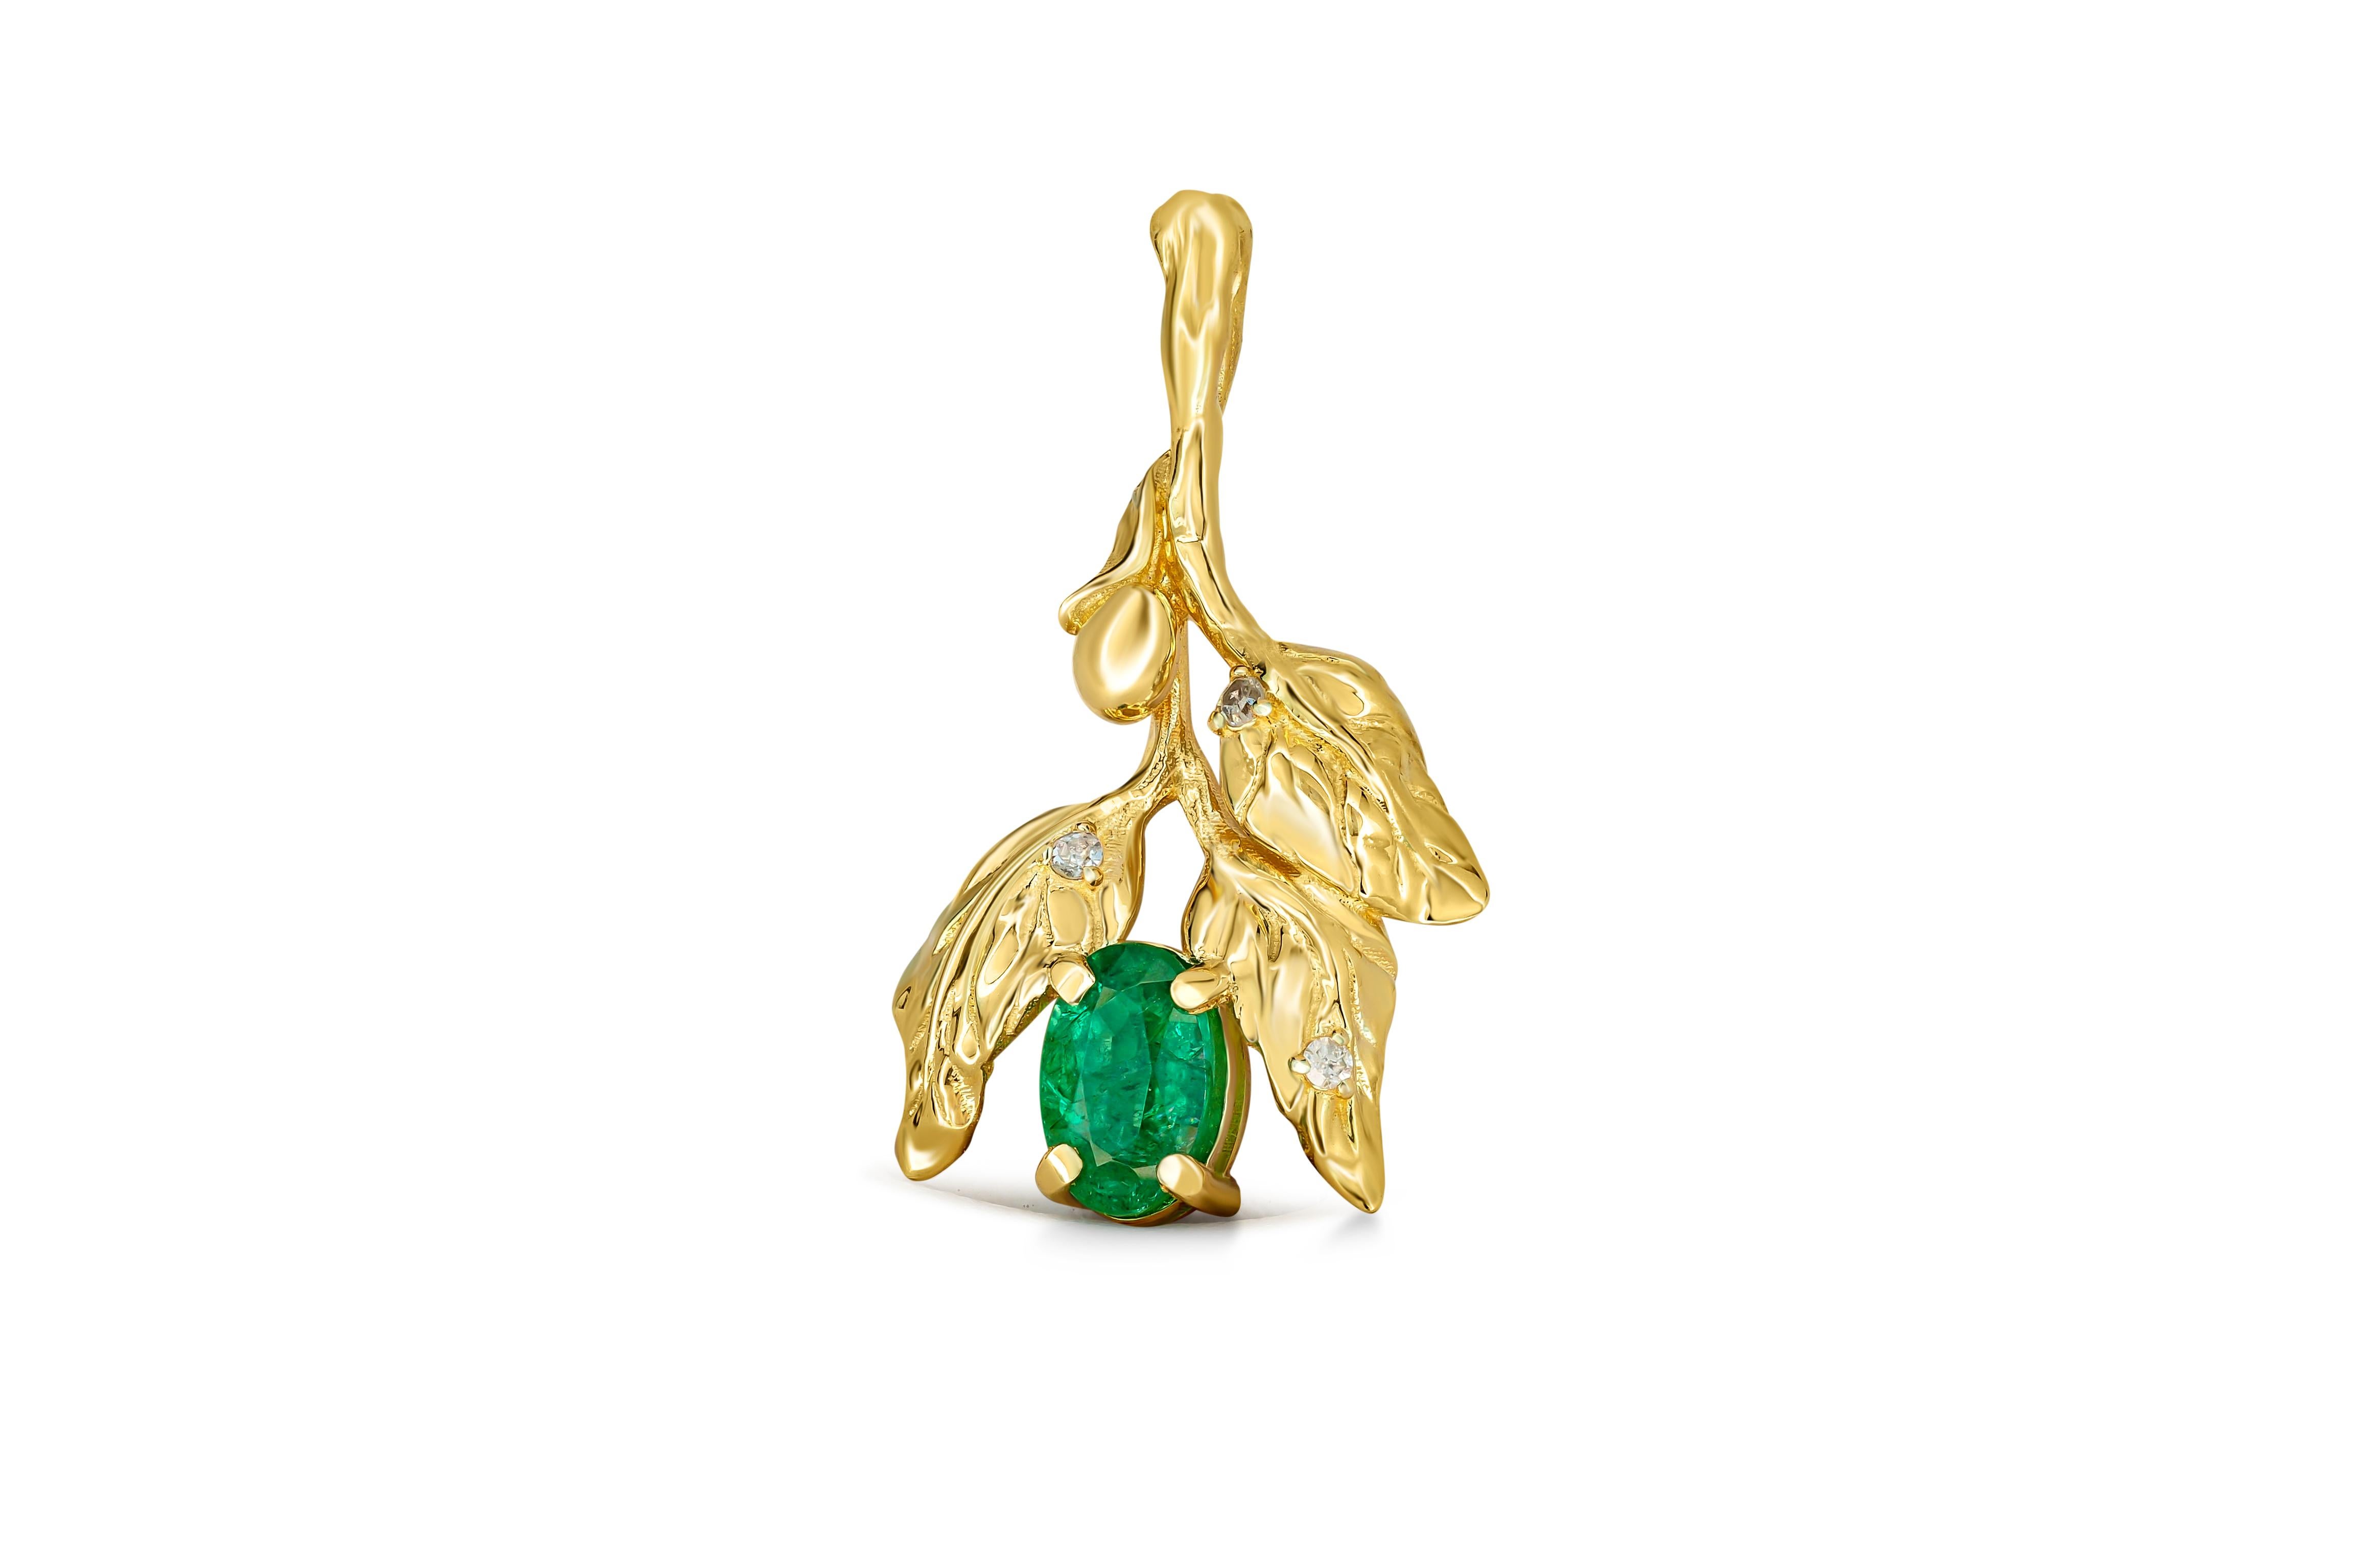 Olive pendant with emerald. 
Oval emerald 14k gold pendant. Gold Branch pendant. May birthstone pendant. Gold Leaf pendant. Emerald pendant.

Metal: 14kt solid gold
Pendant size: 23.3 x 13.7 mm.
Weight: 2.4 g.

Gemstones:
Natural emeralds: 1 piece,